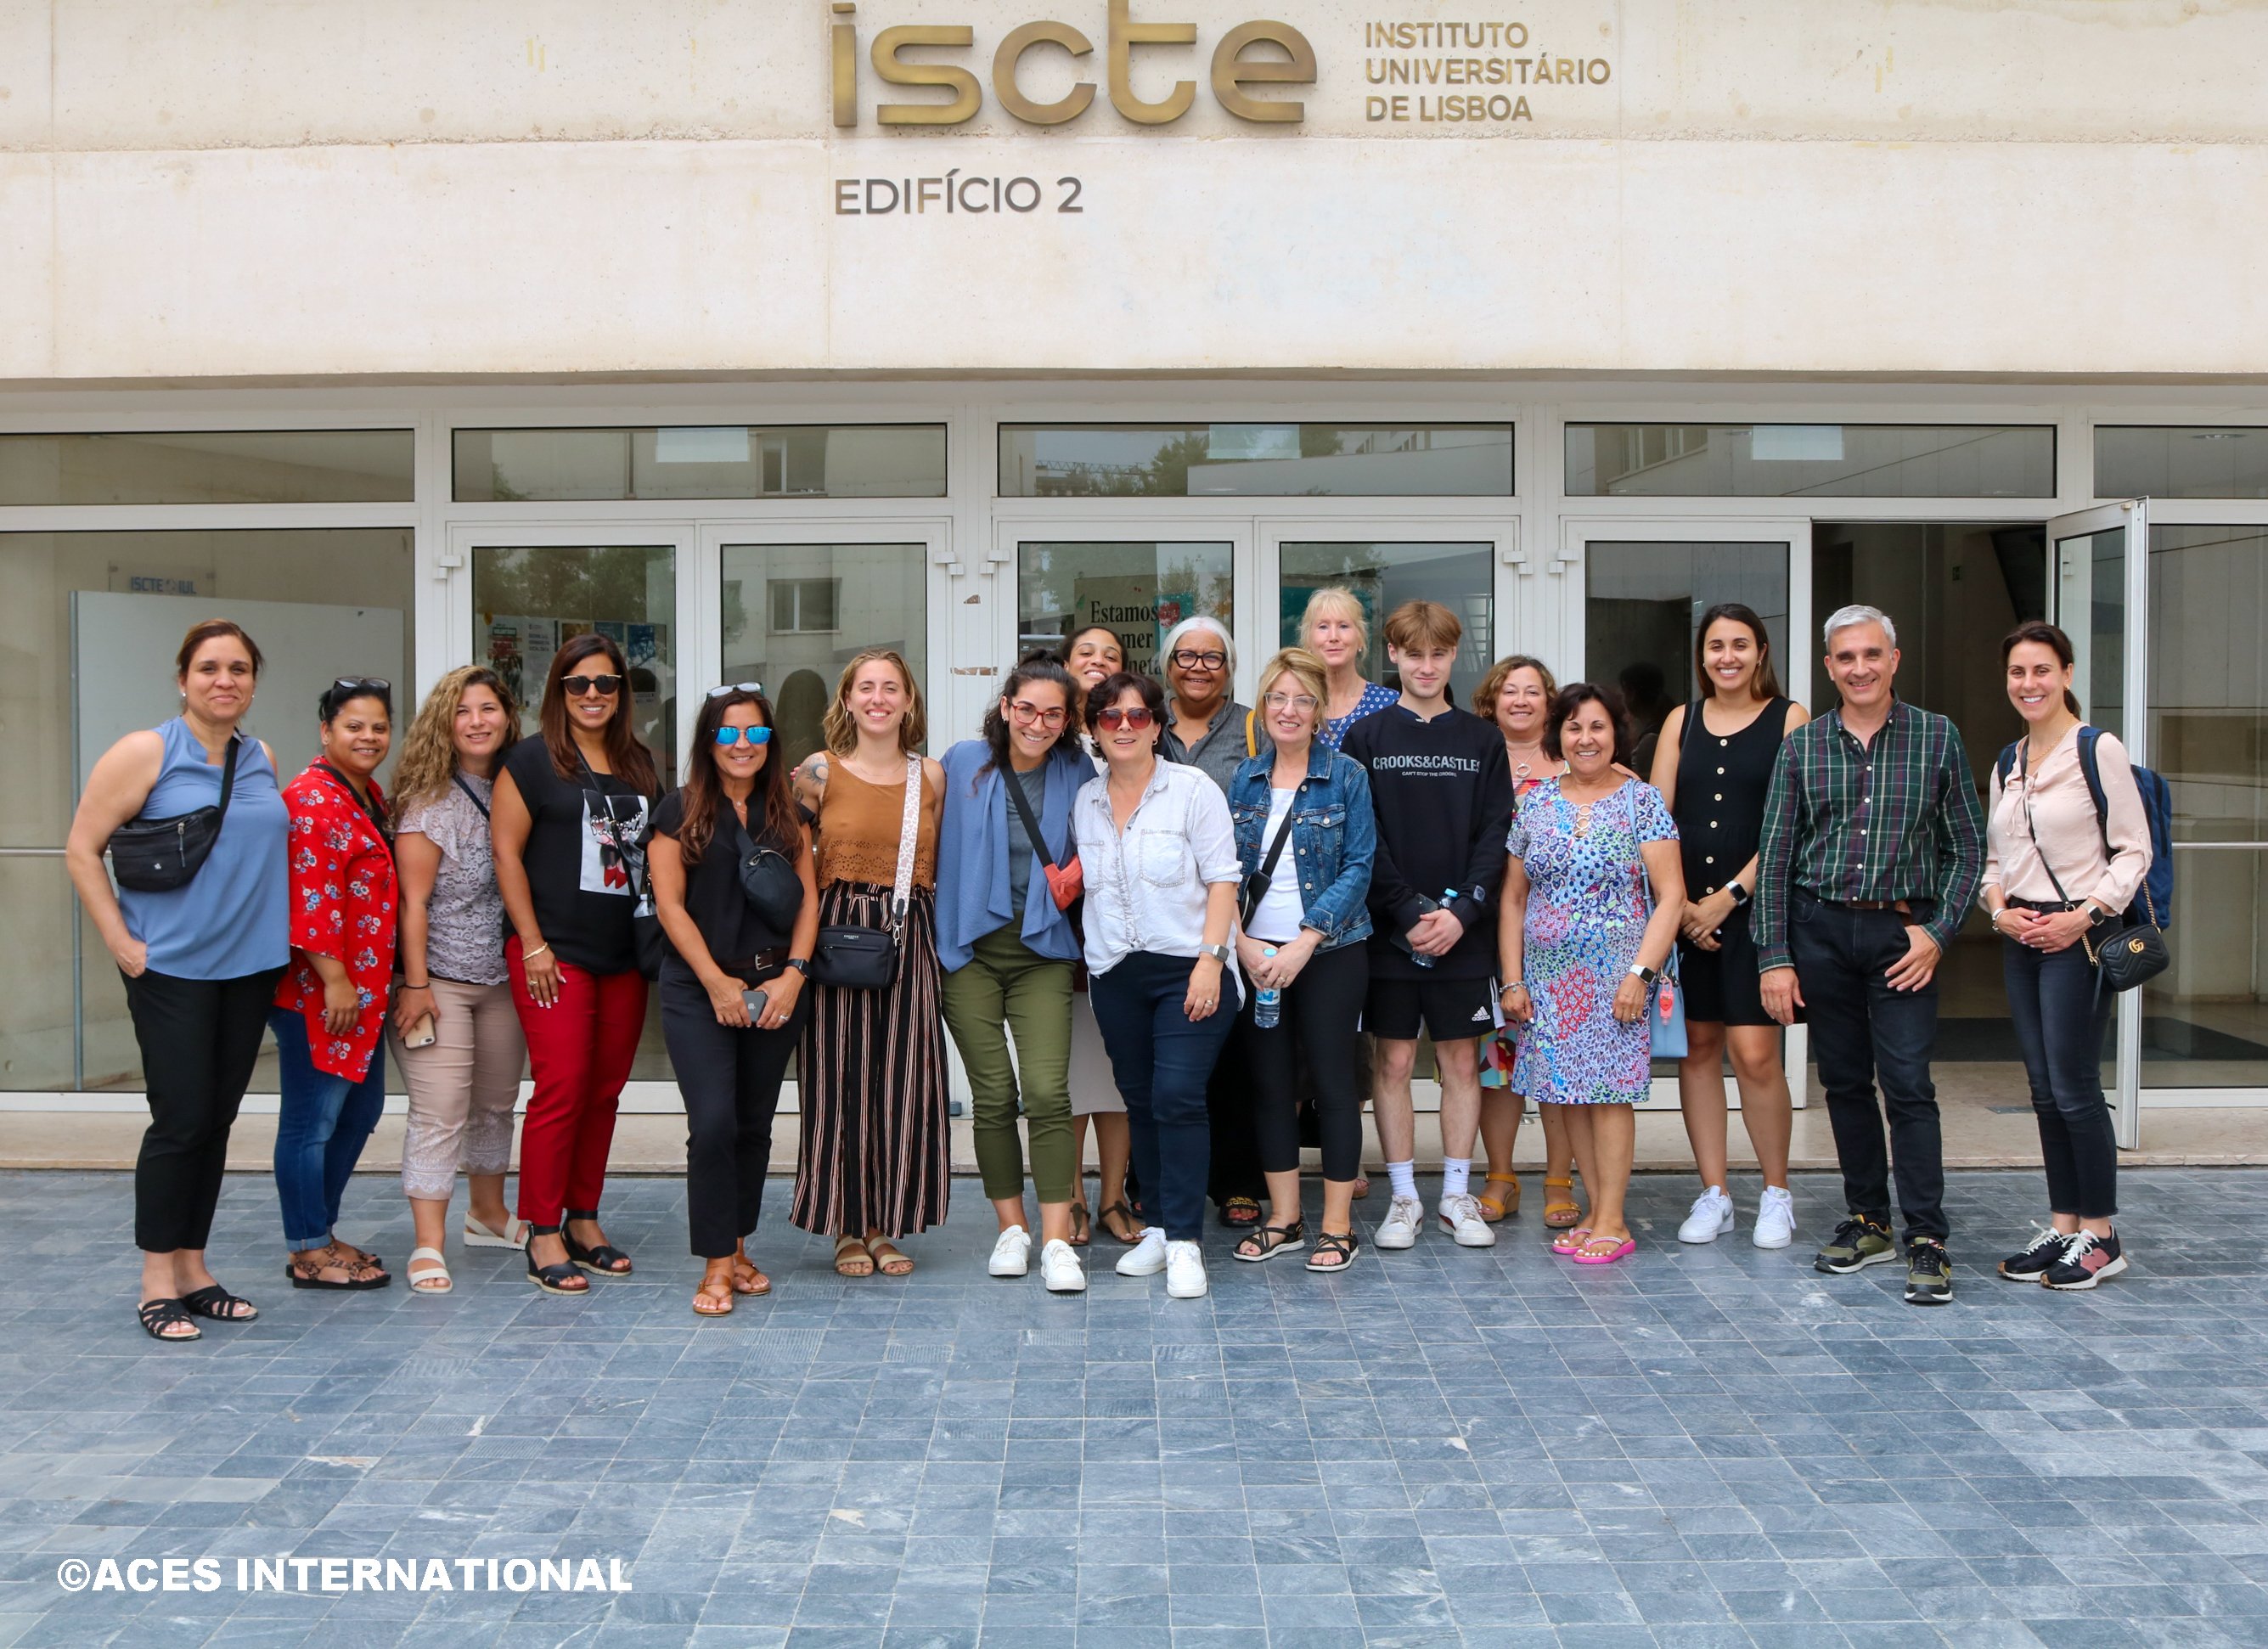 The Educators Field Study group takes a picture in front of the Instituto Universitário de Lisboa.